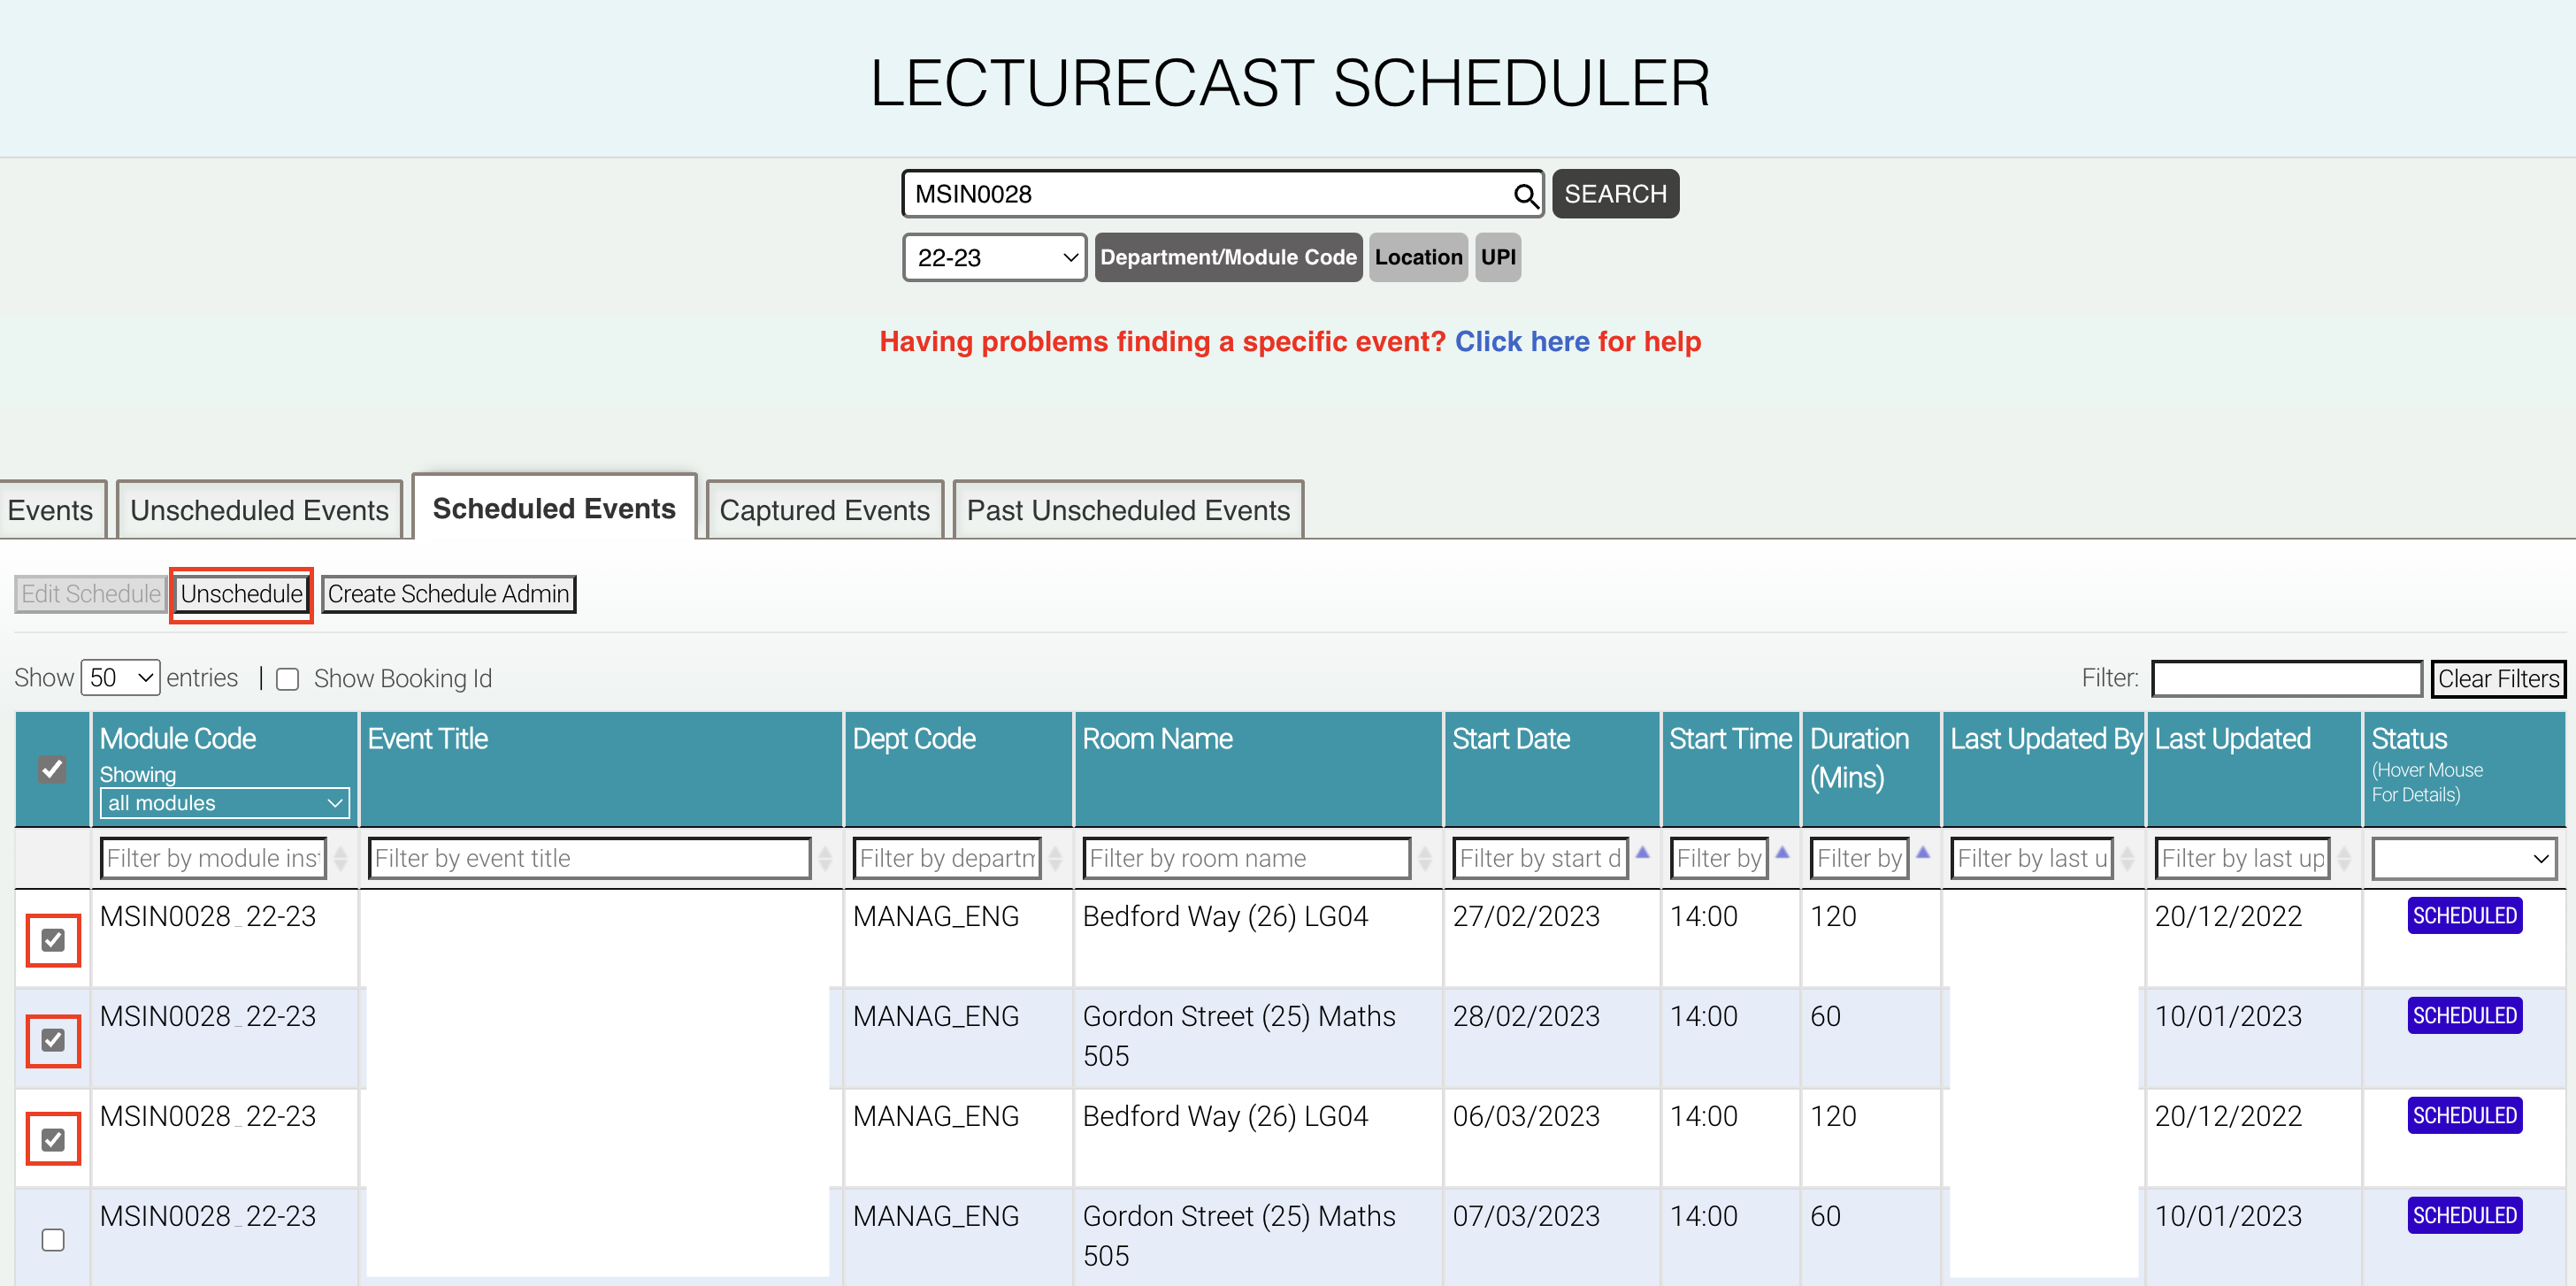 A screenshot of the Lecturecast Scheduler page with the 'Unschdedule' button and the event checkboxes highlighted. 